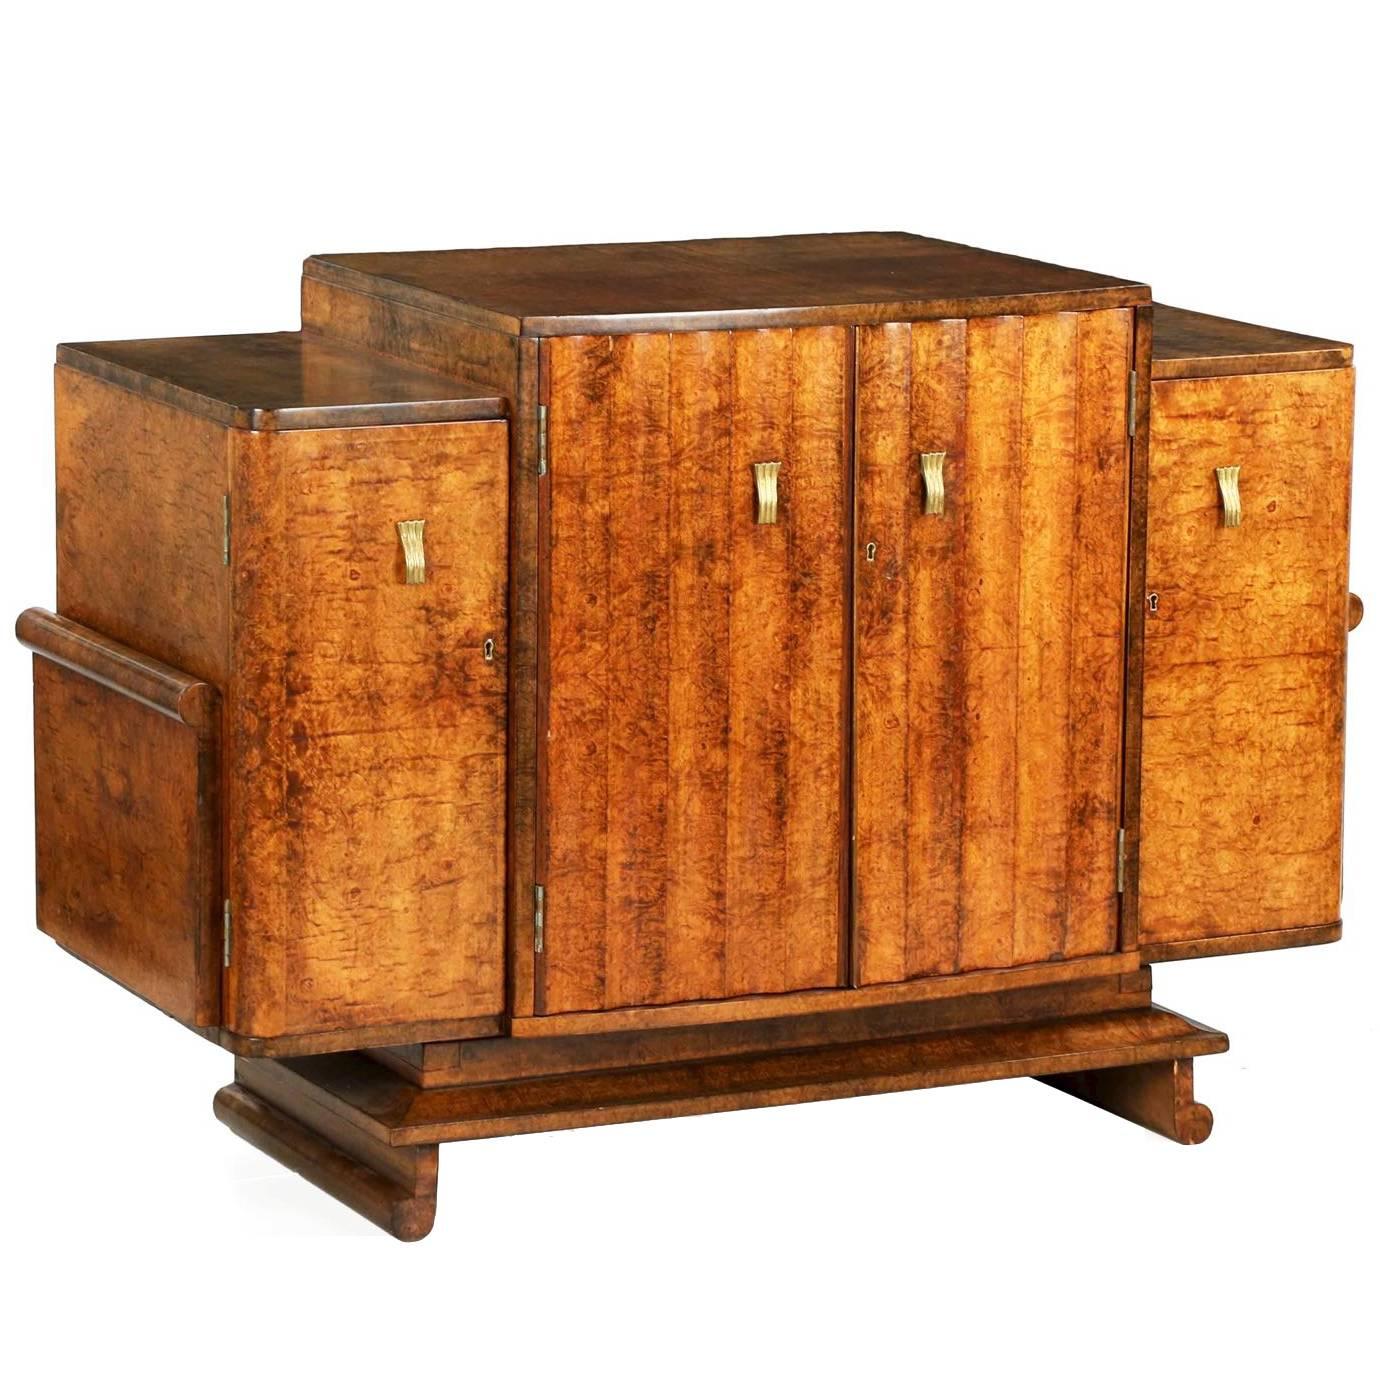 Art Deco Amboyna Veneered Stepped Console Cabinet with Drawers, circa 1930